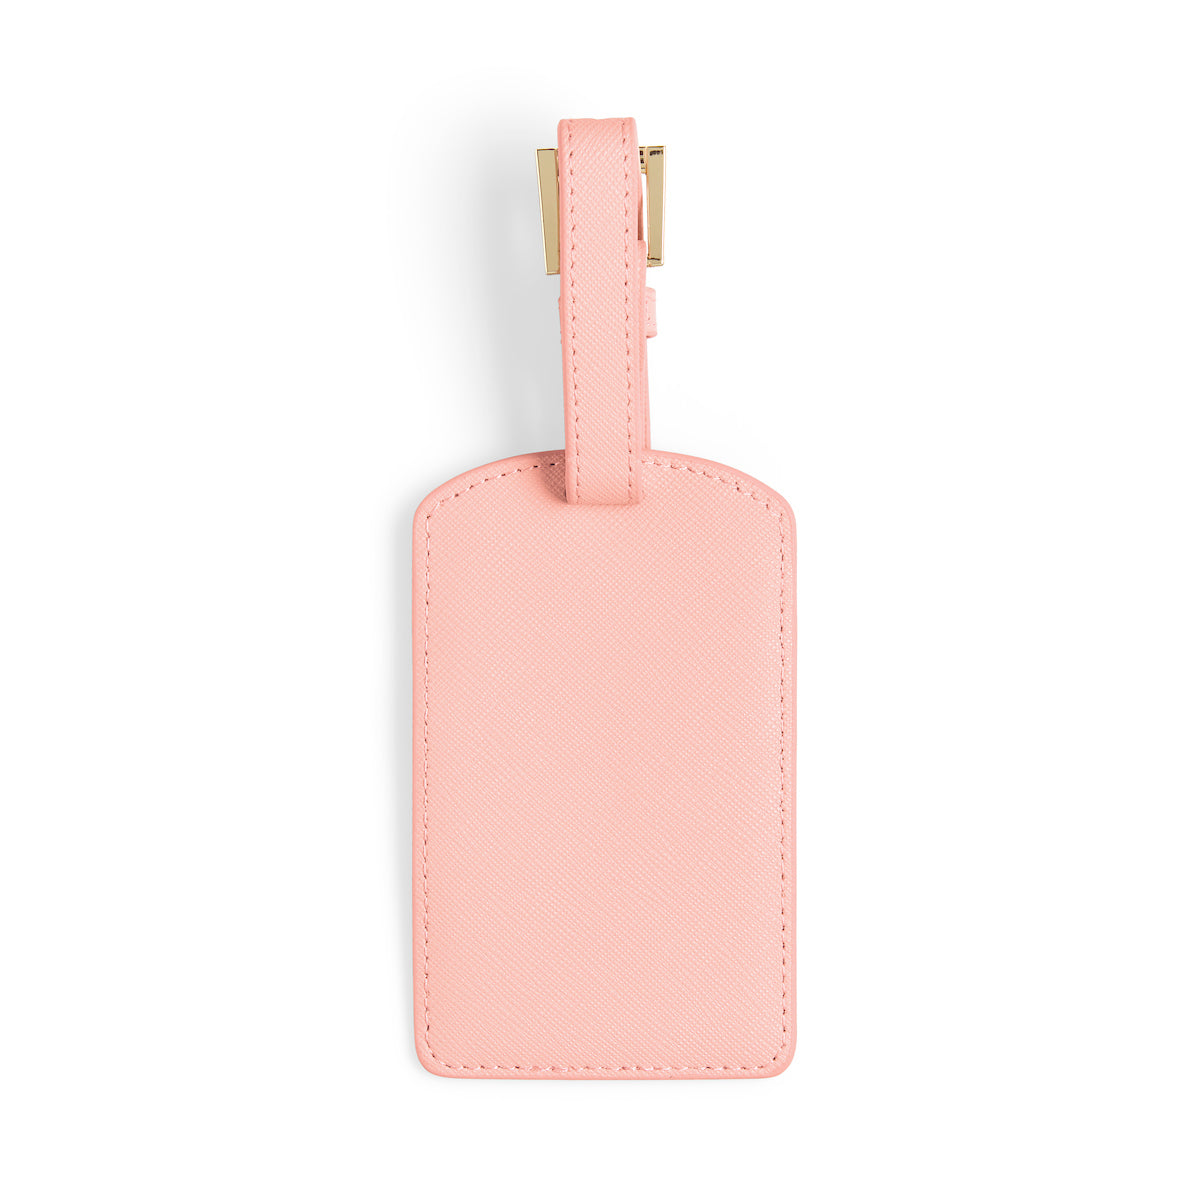 Luggage Tag - Pale Pink